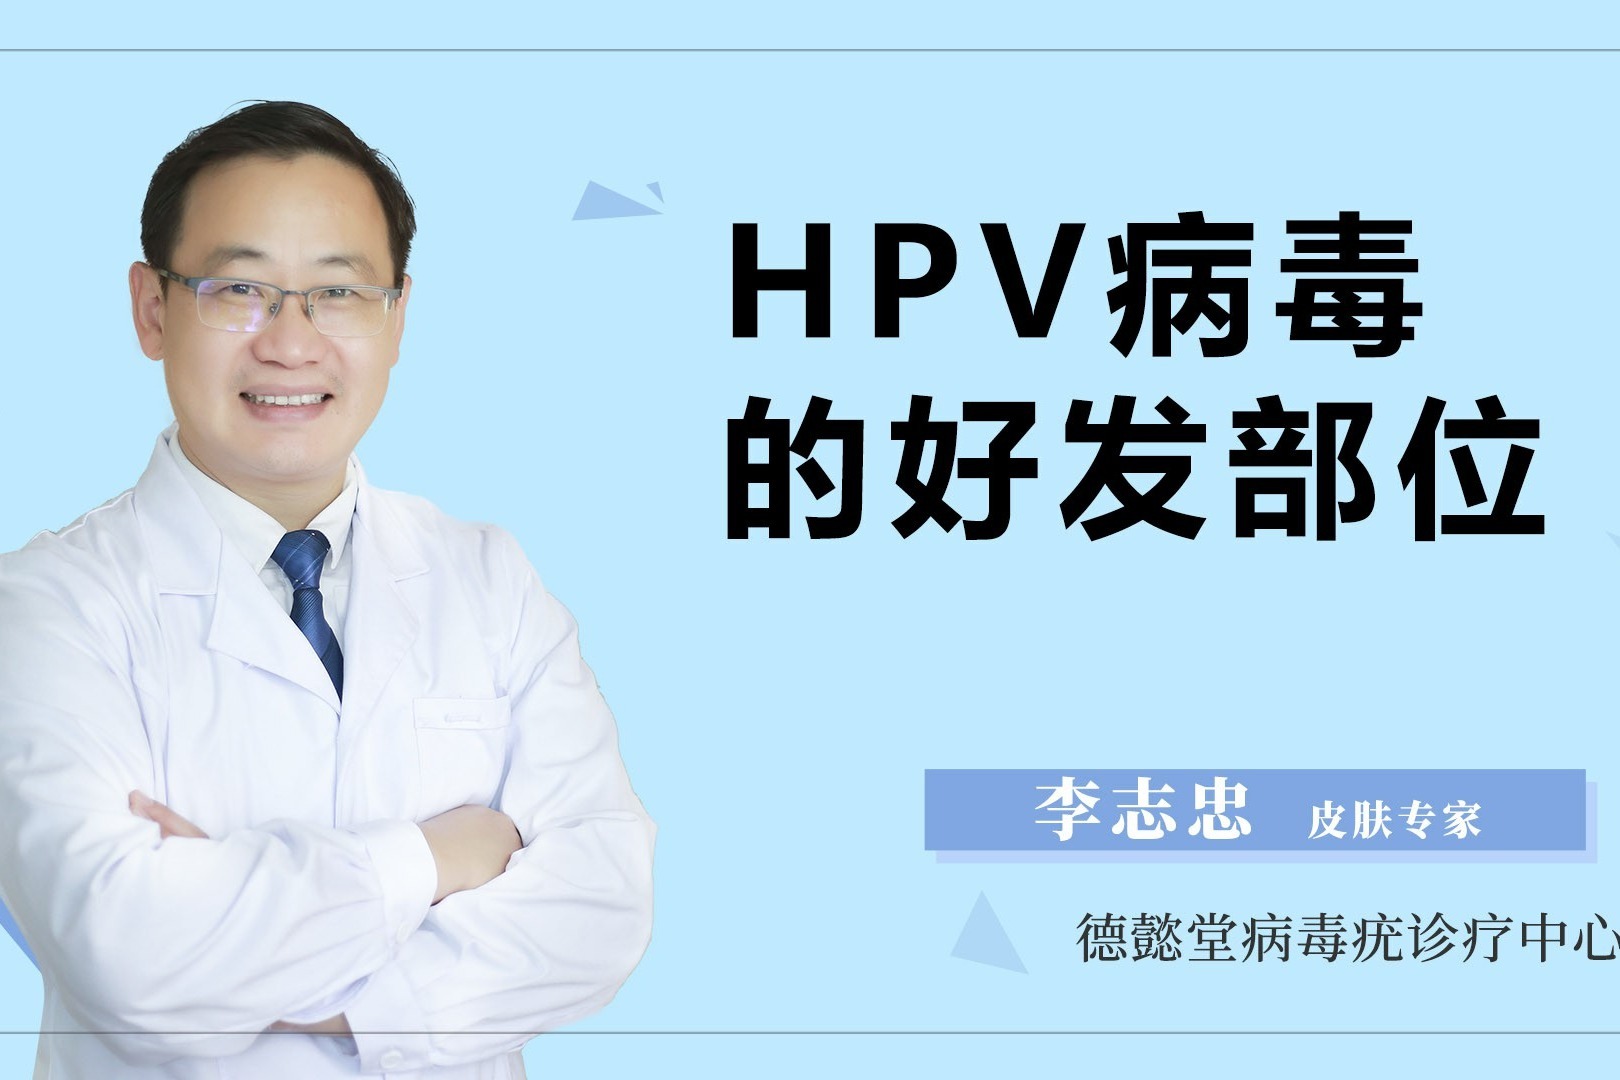 HPV Infections: Diagnosis, Prevention and Treatment